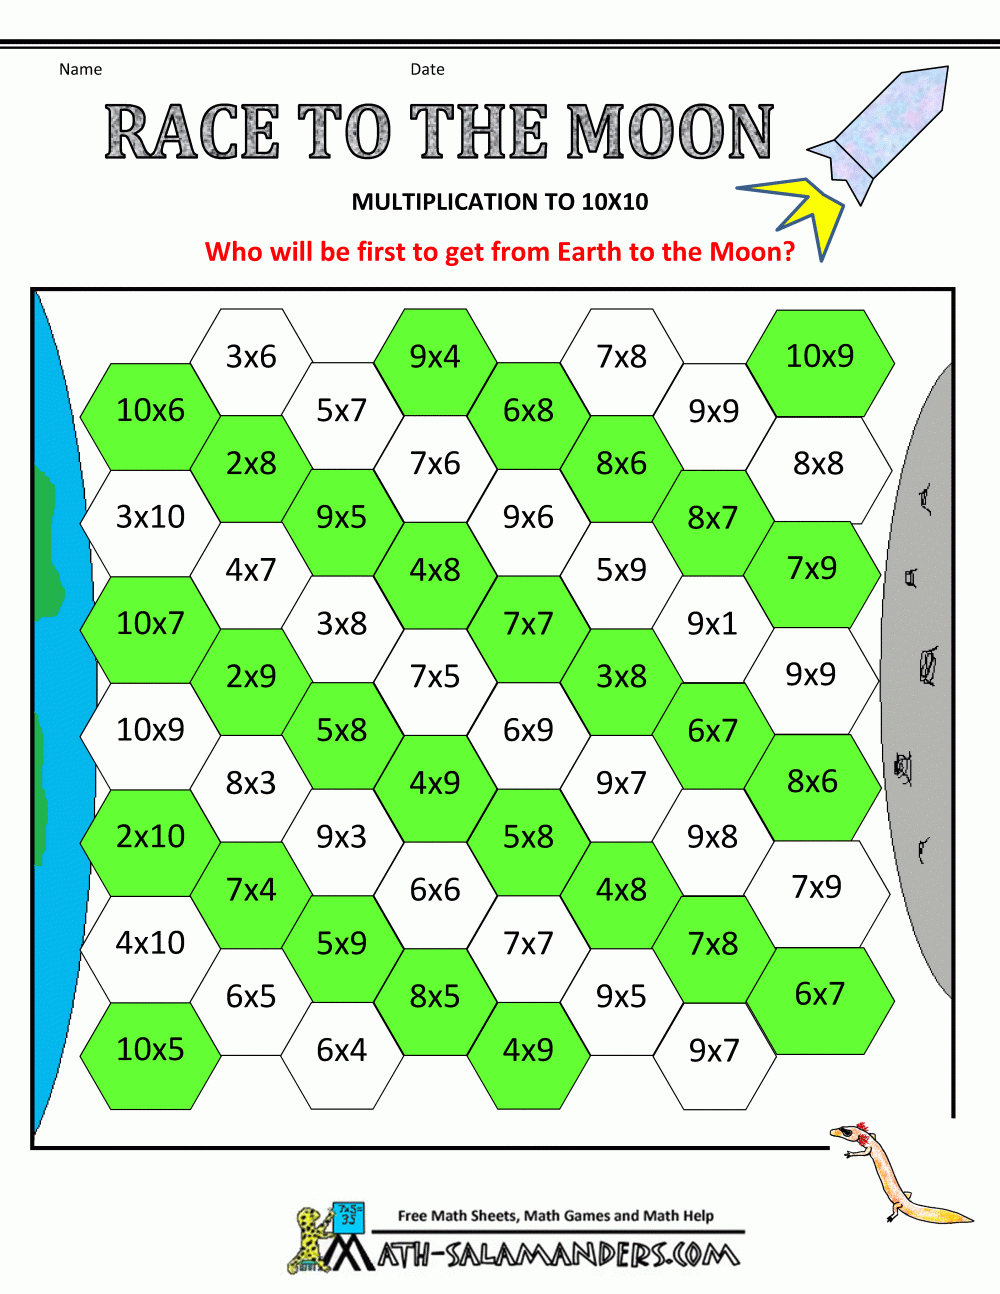 Math Multiplication Games Race To The Moon Multiplication To 10X10 - Free Printable Maths Games